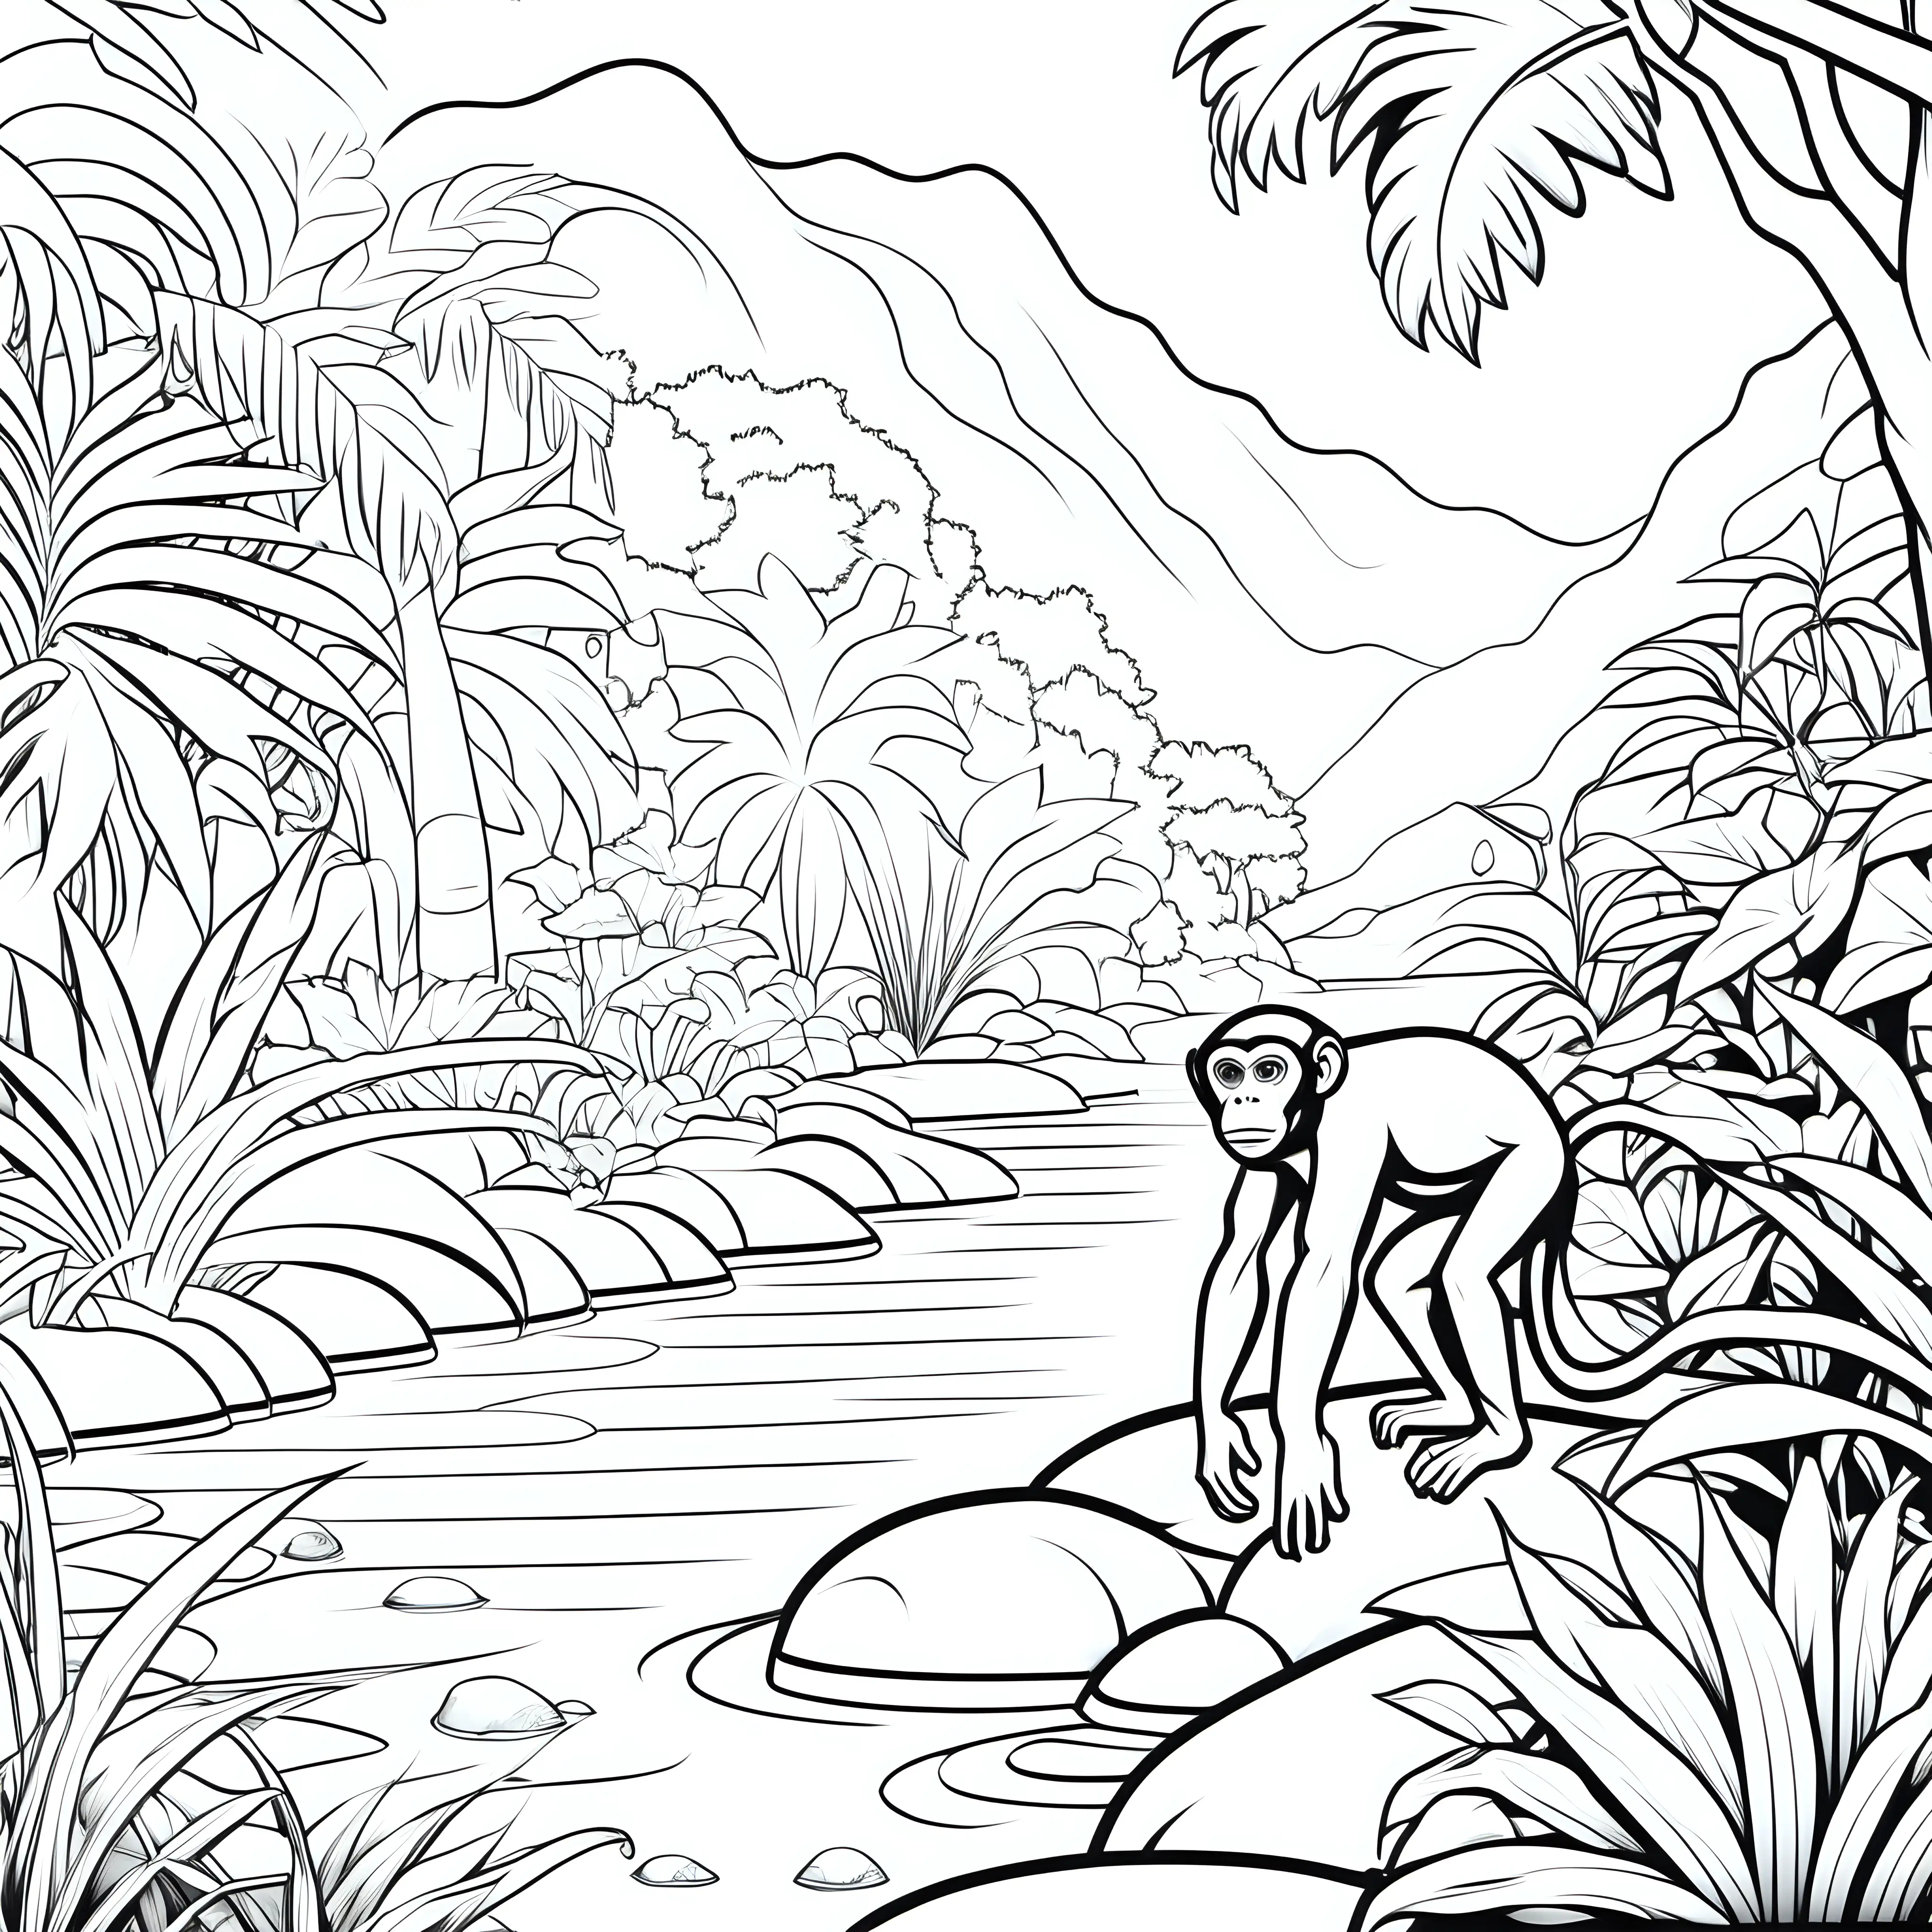 Coloring page for kids, Monkey in Garden of Eden close to a water body, clean line art